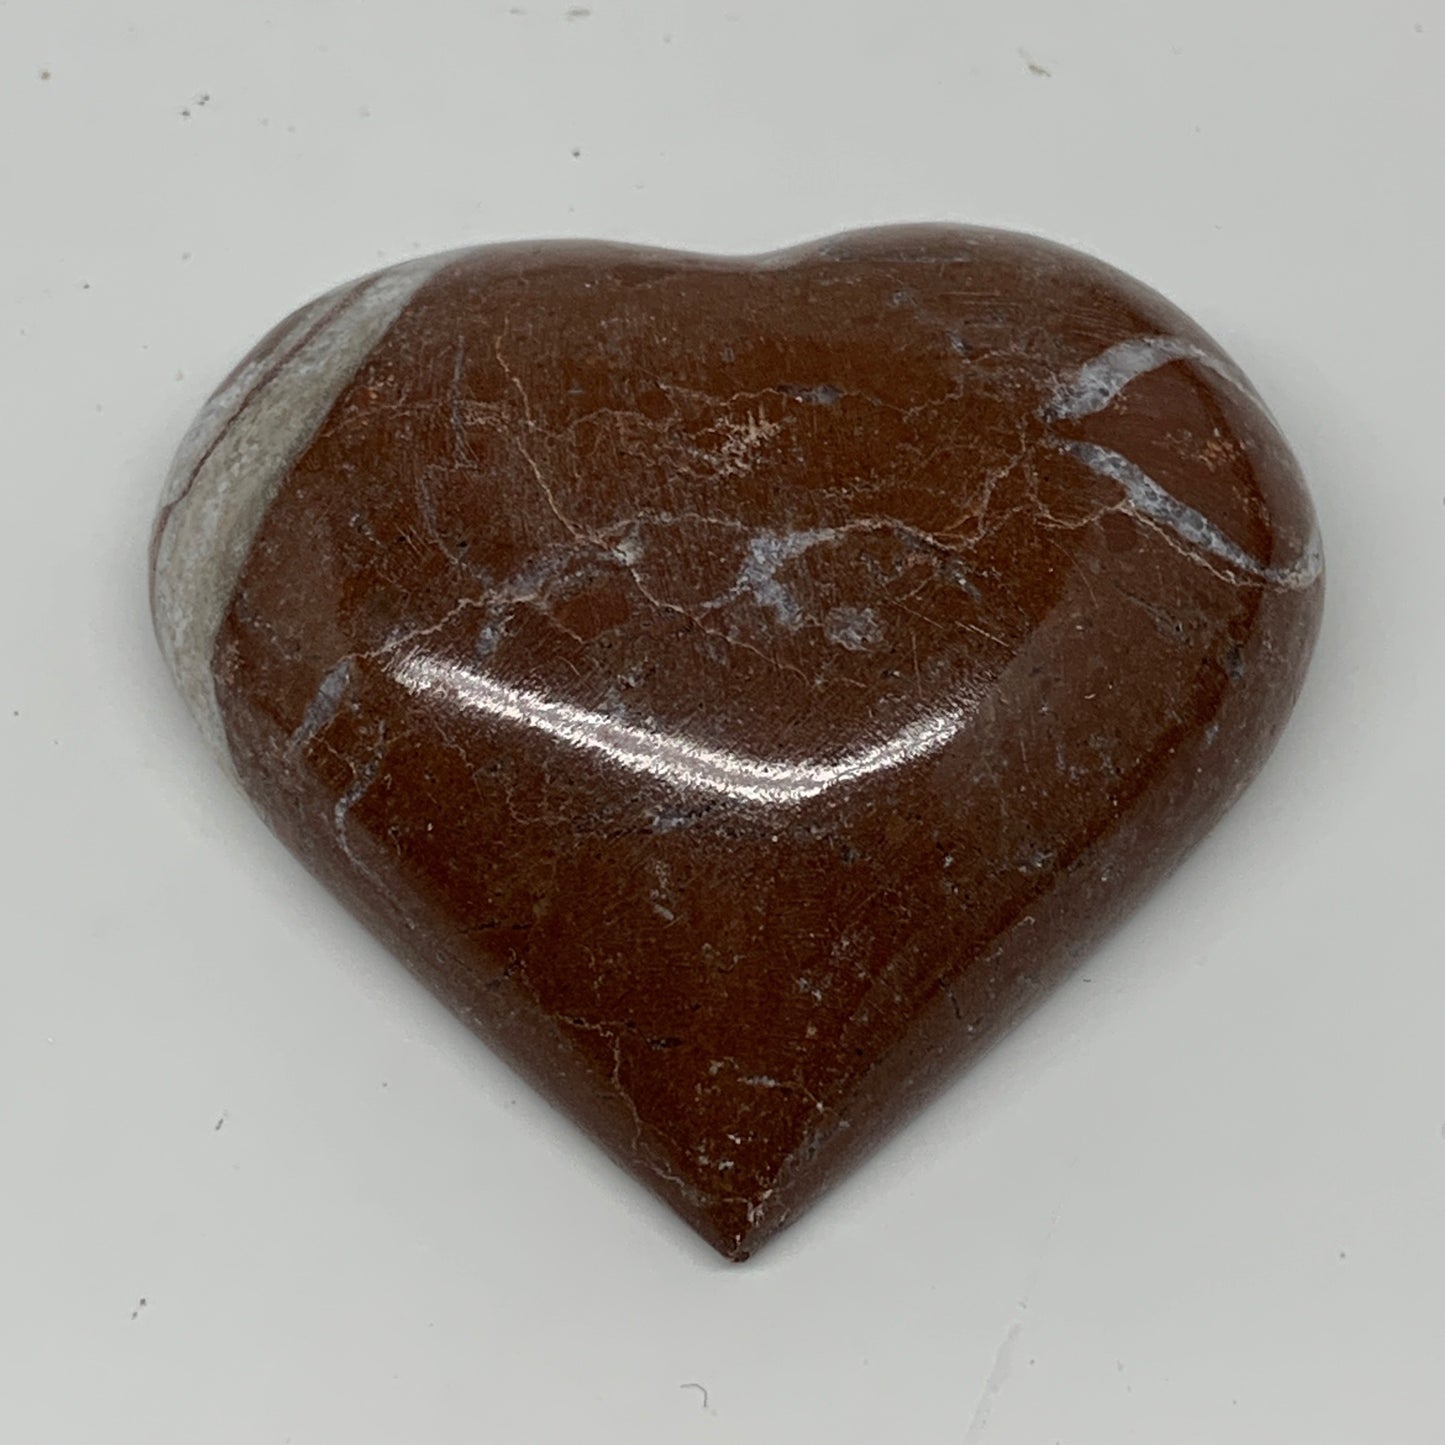 63.5g, 2" x 2.2"x 0.7", Natural Untreated Red Shell Fossils Half Heart @Morocco,